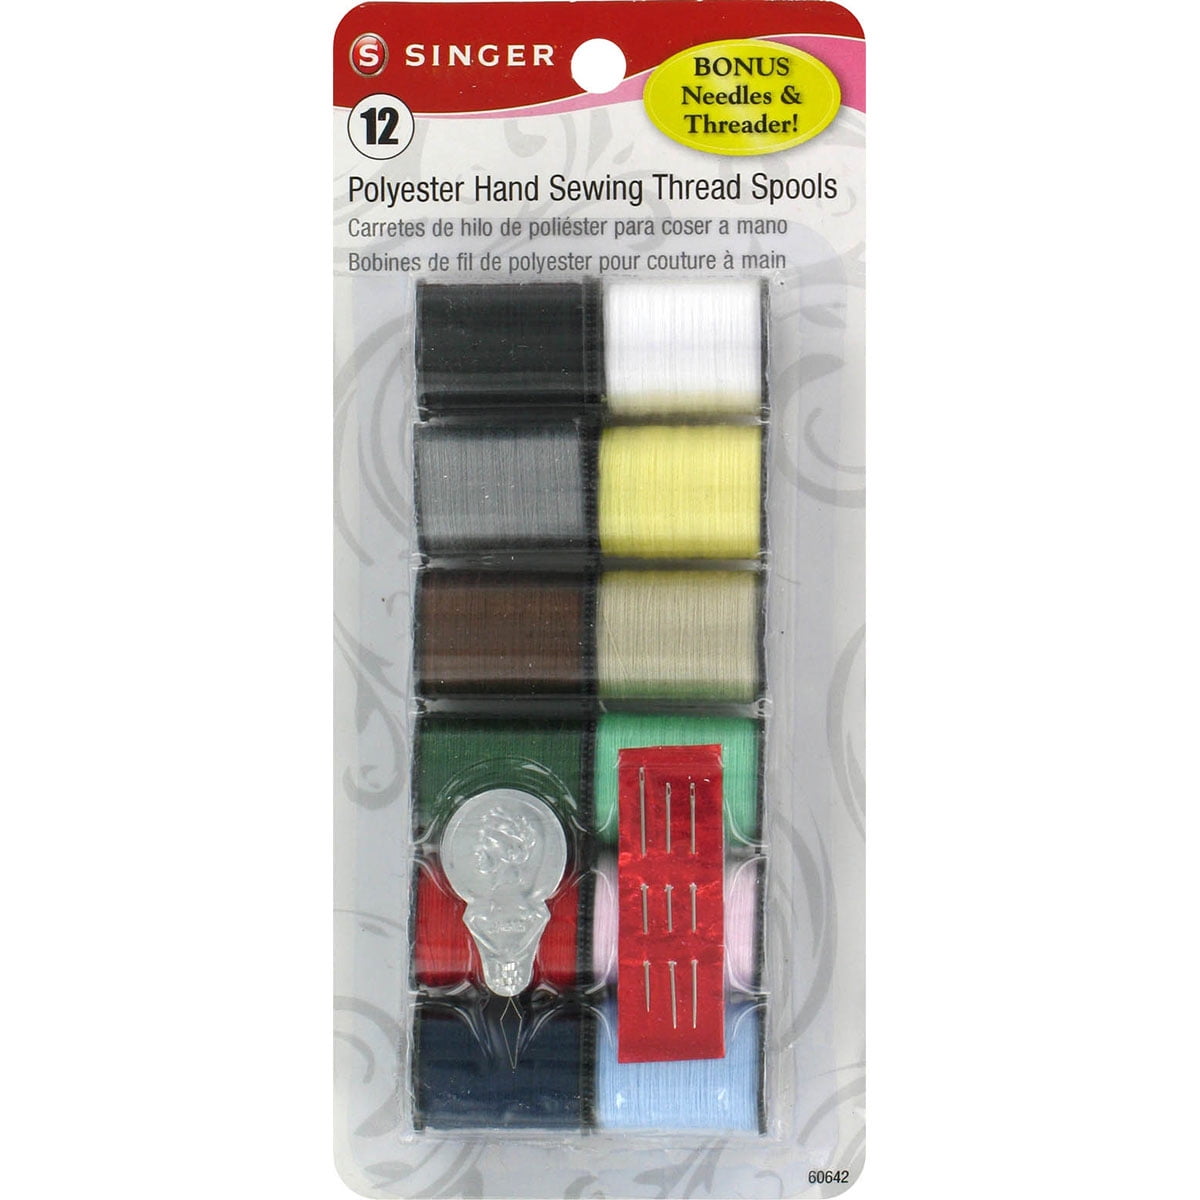 Singer Proseries Size 5 Hand Embroidery Needles With Magnet 04325 